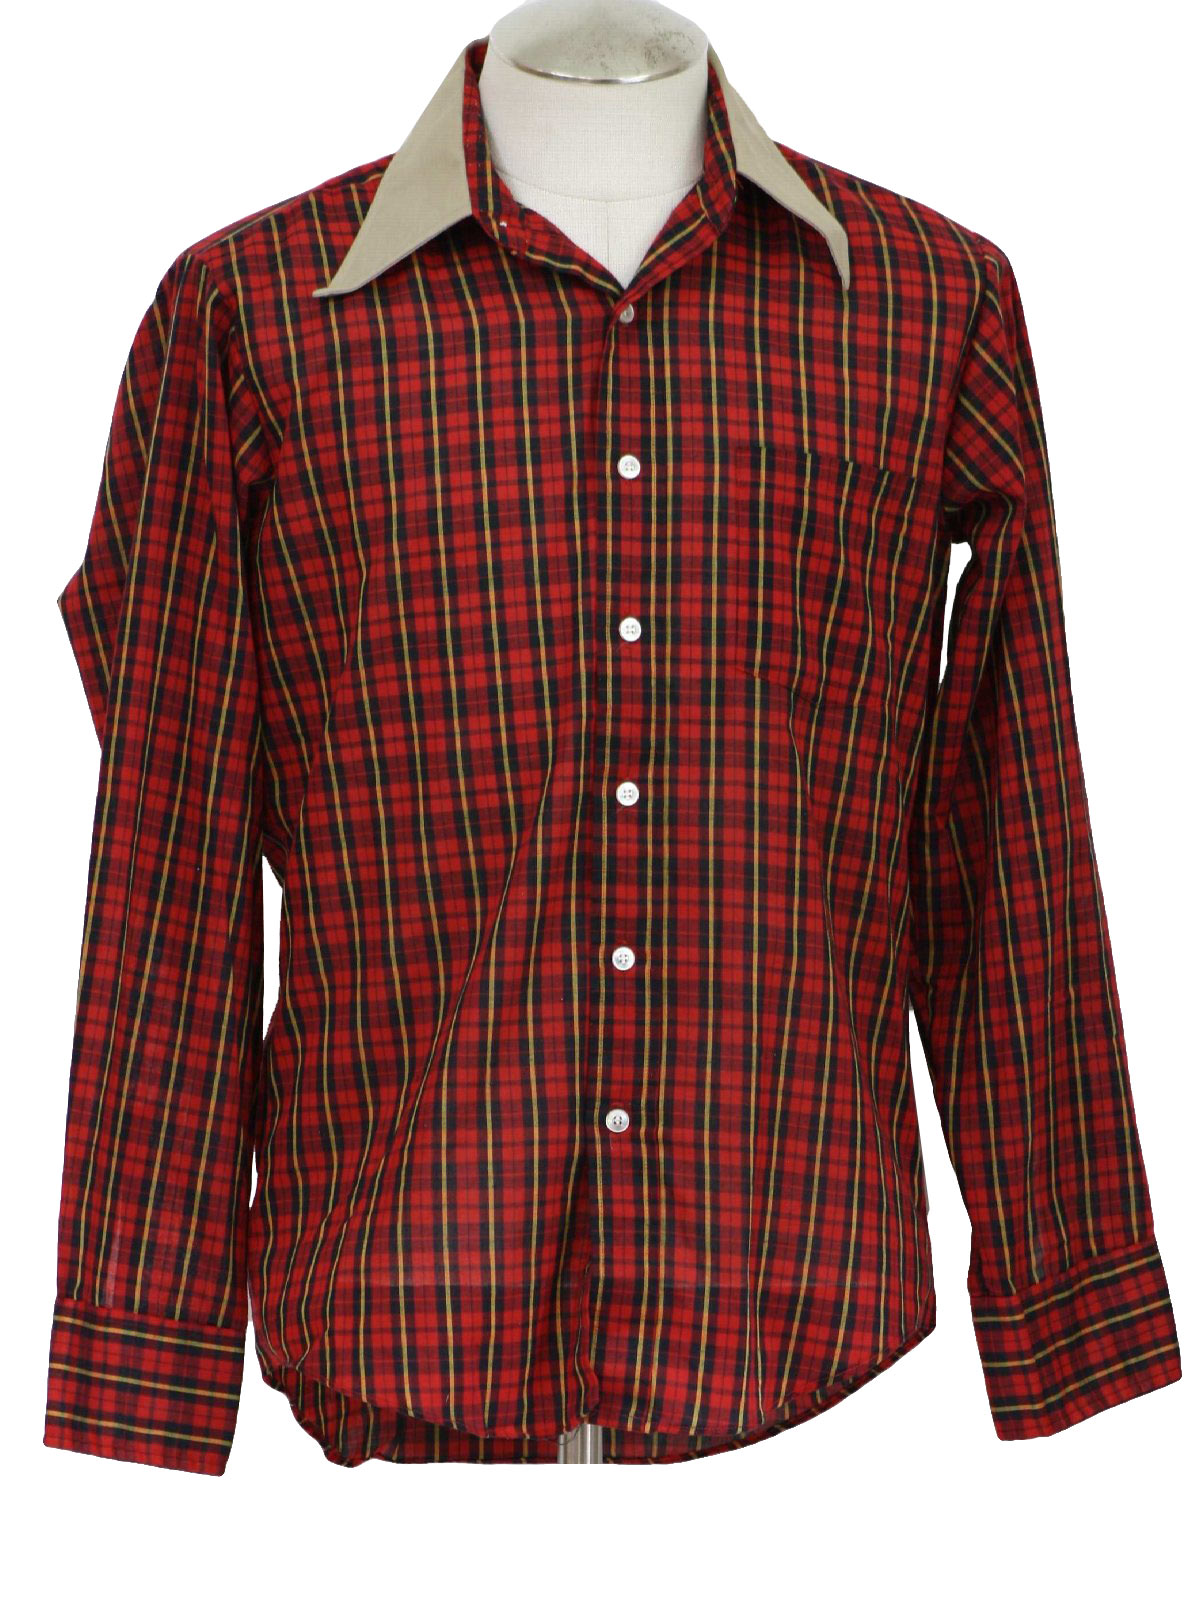 Retro 1970's Shirt (Haband) : 70s -Haband- Mens red, black and gold ...